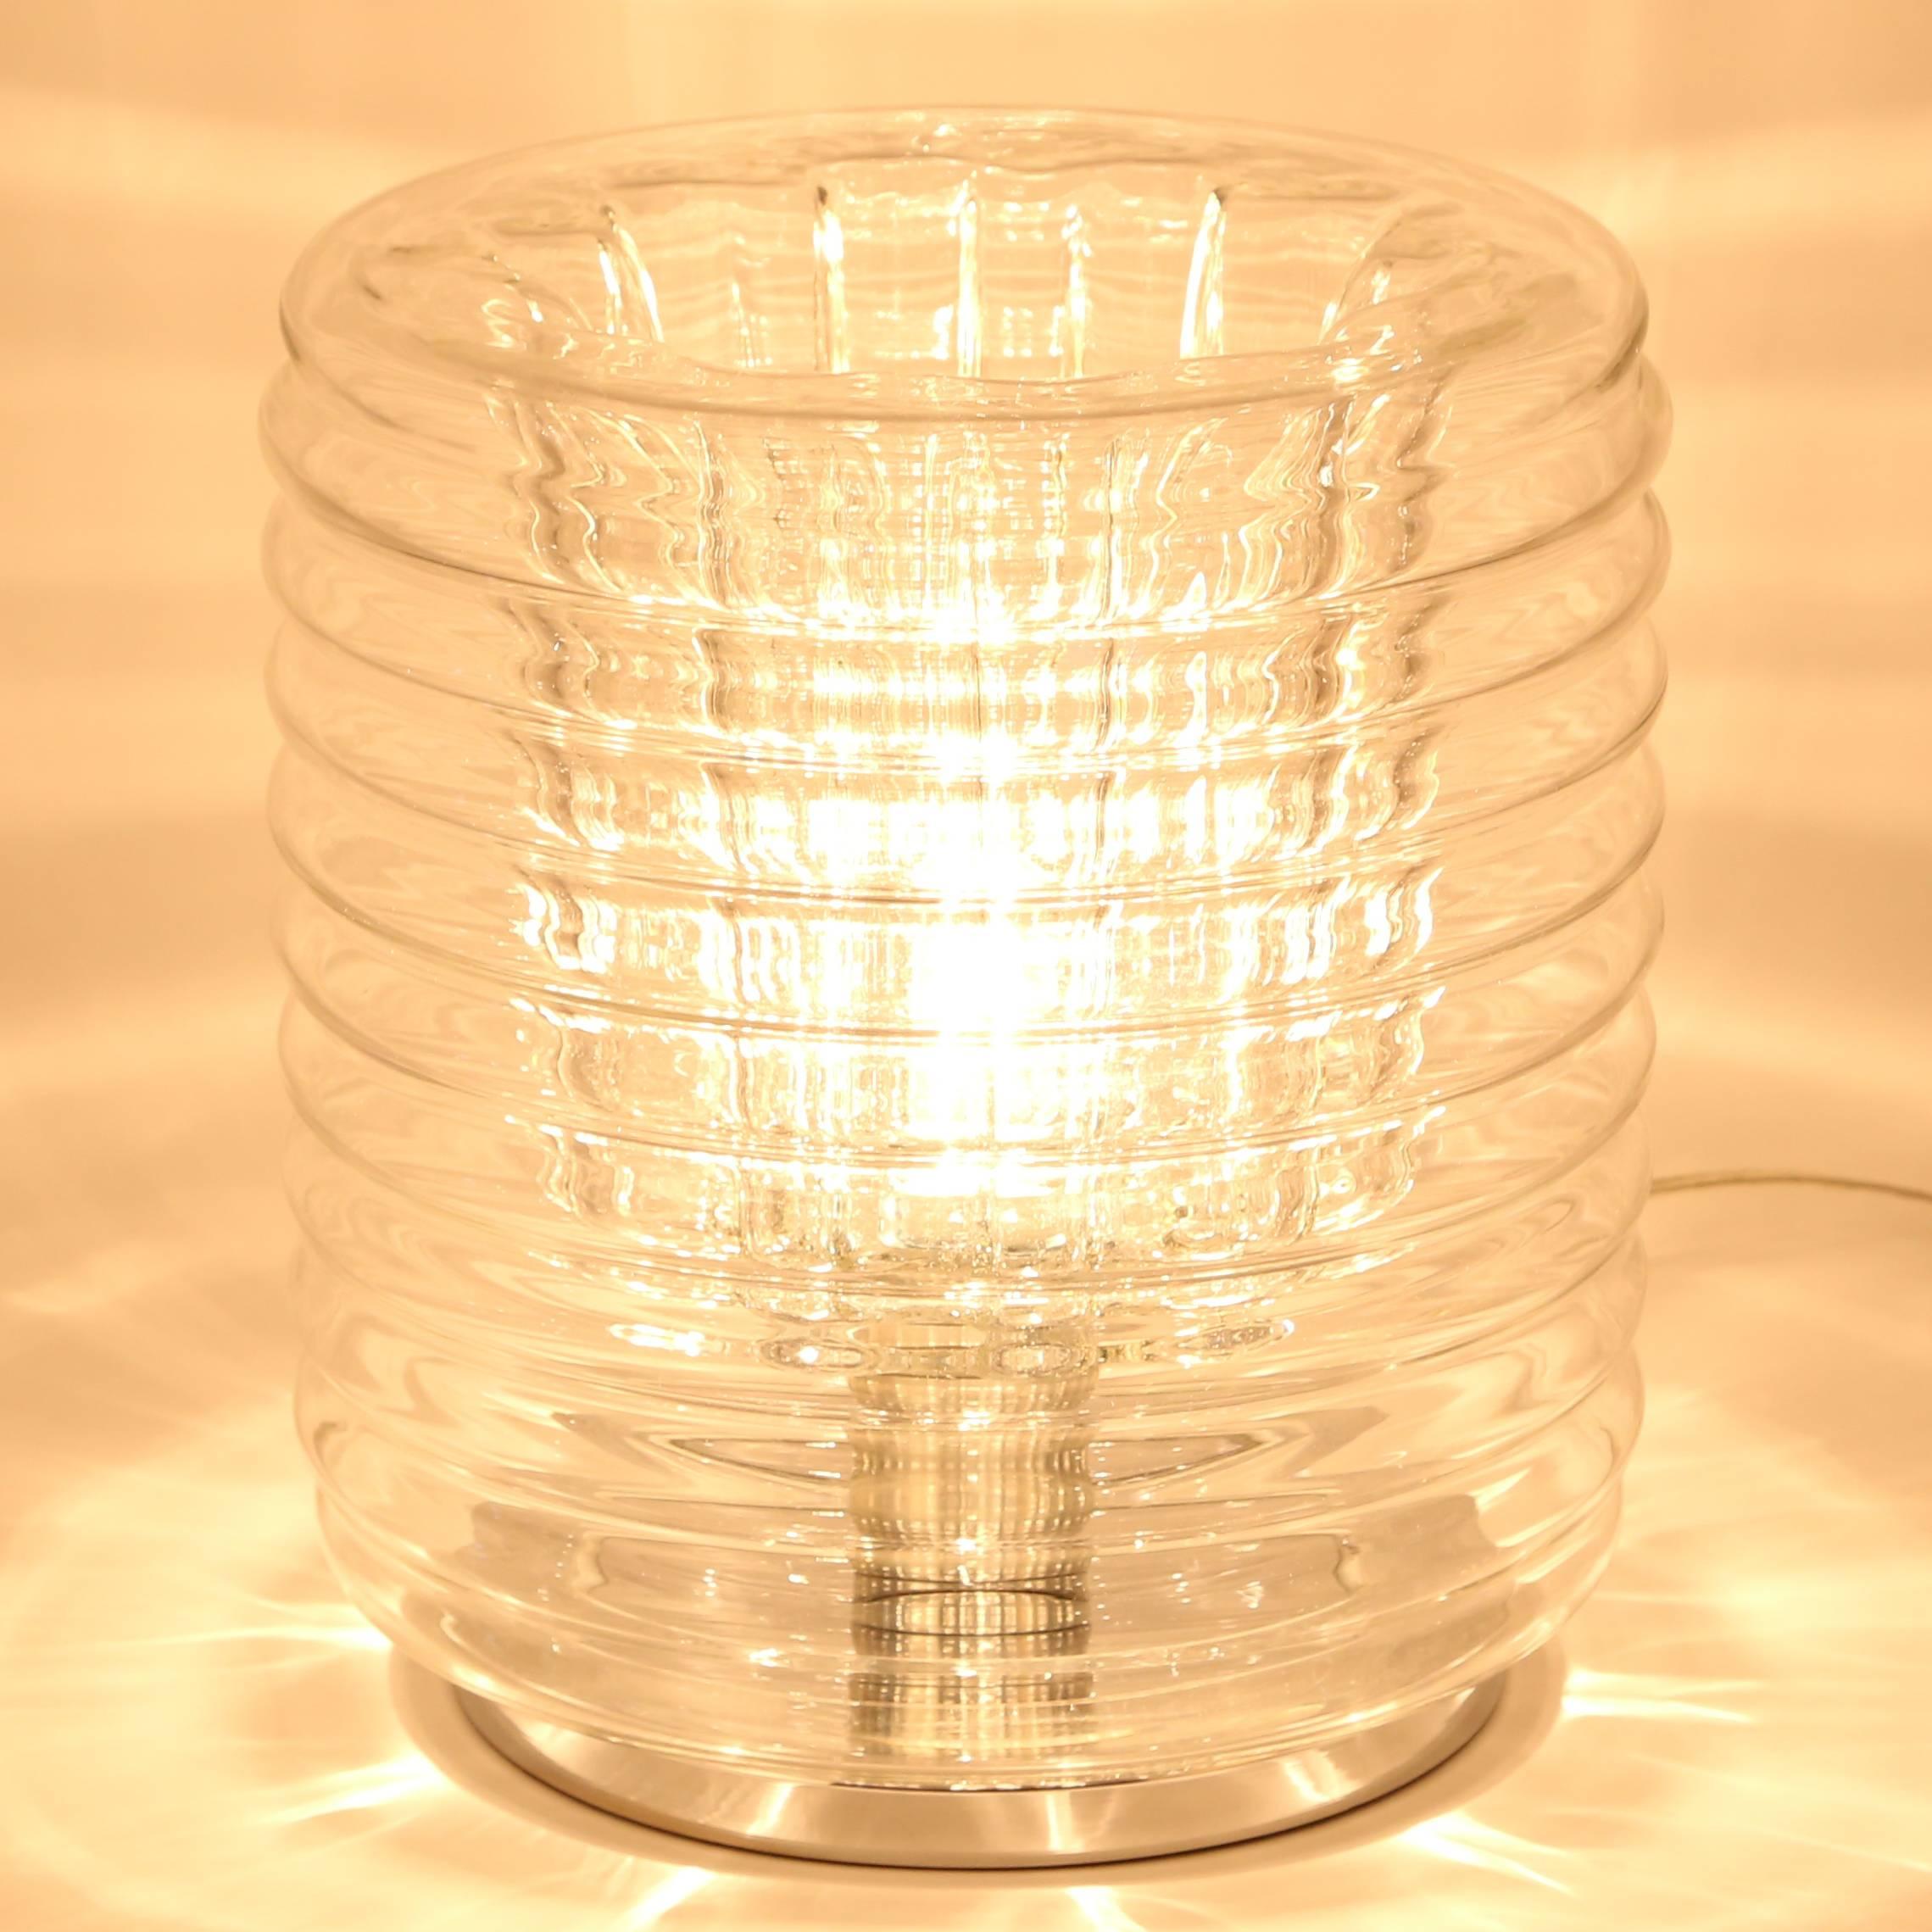 Stylish blown-glass accent lamp with a ribbed exterior and undulating interior. Projects beautiful light patterns in a dimly lit room. Glass globe rests on a weighted chrome base and is held in place by a metal ring that screws onto the porcelain